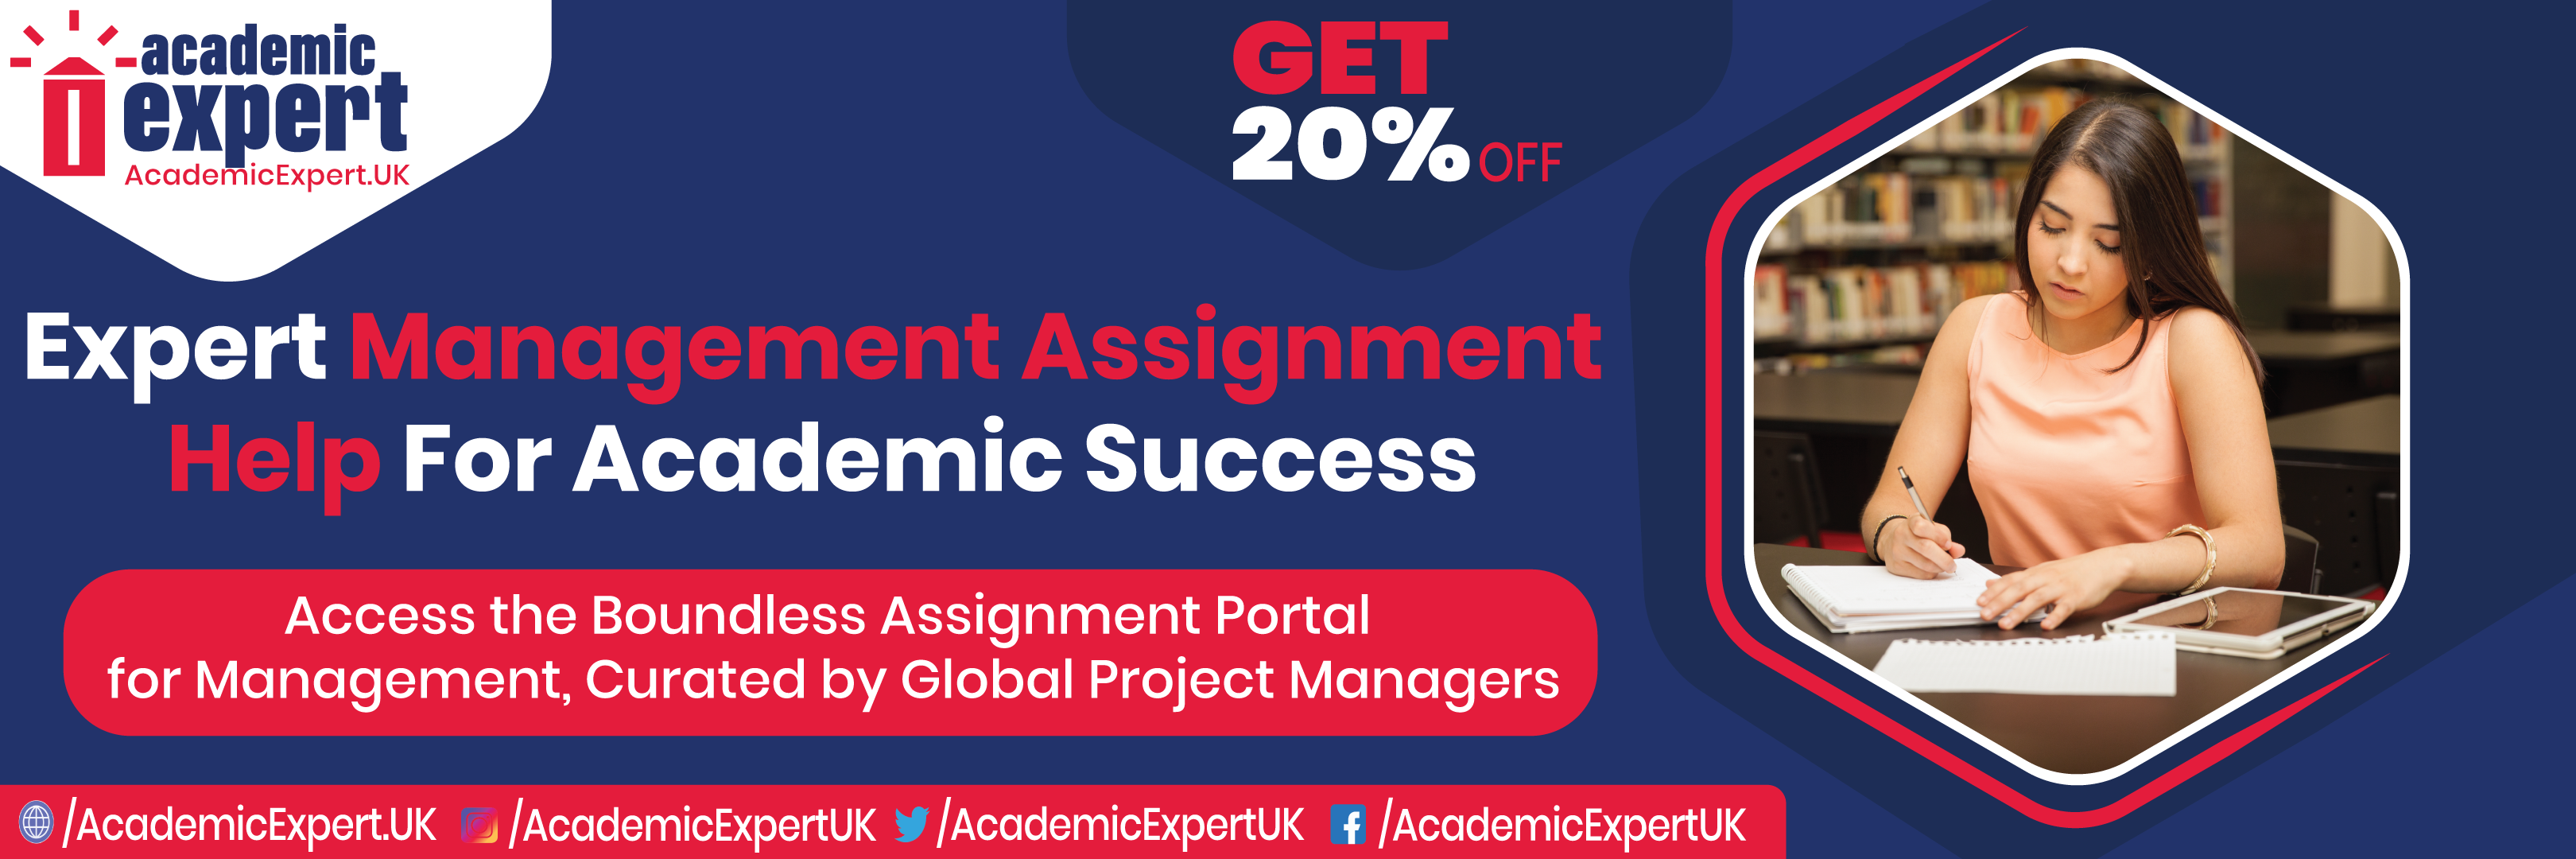 Expert Management Assignment Help Achieve Academic Success With Our Assistance